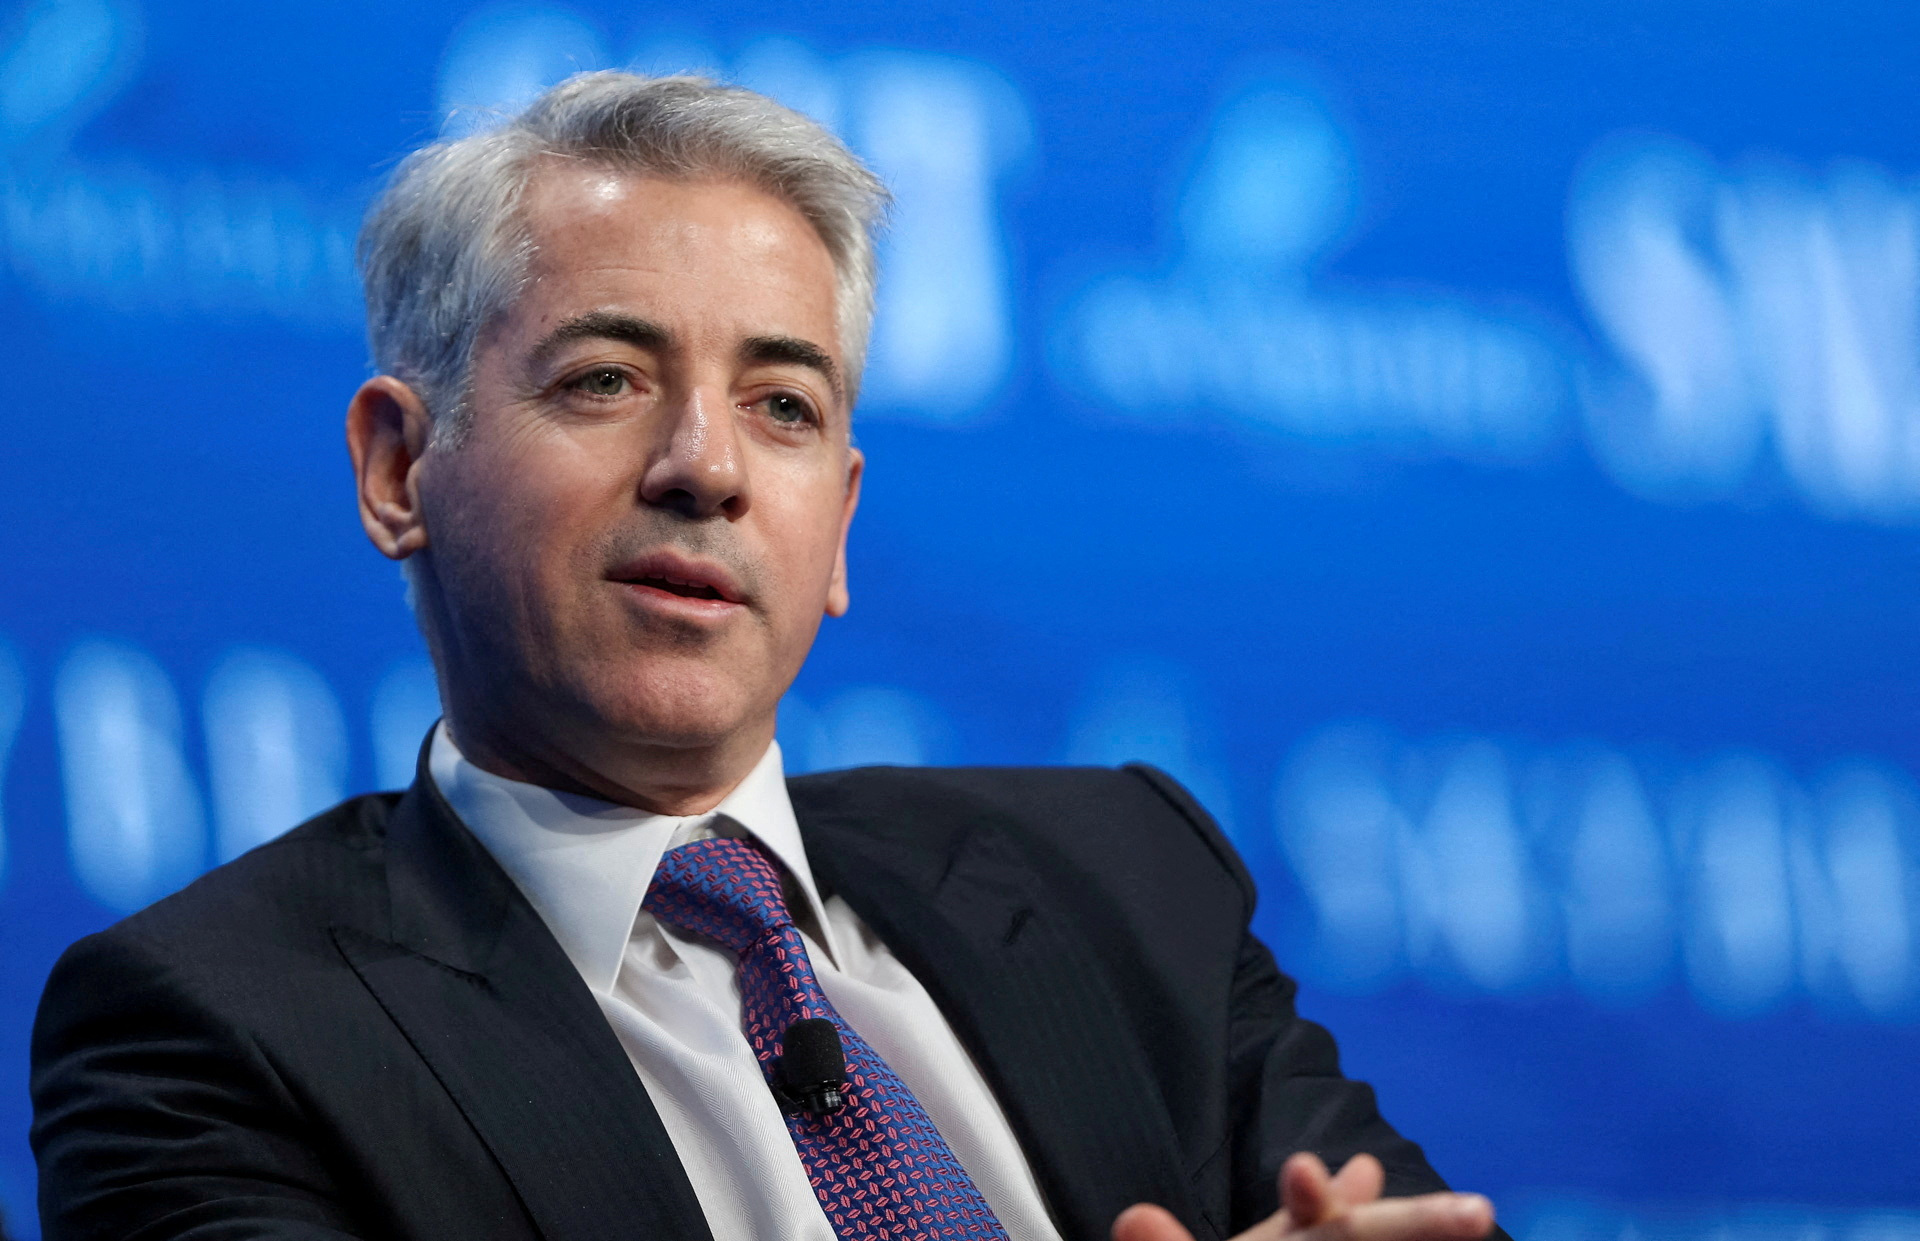 Bill Ackman, chief executive officer and portfolio manager at Pershing Square Capital Management, speaks during the SALT conference in Las Vegas